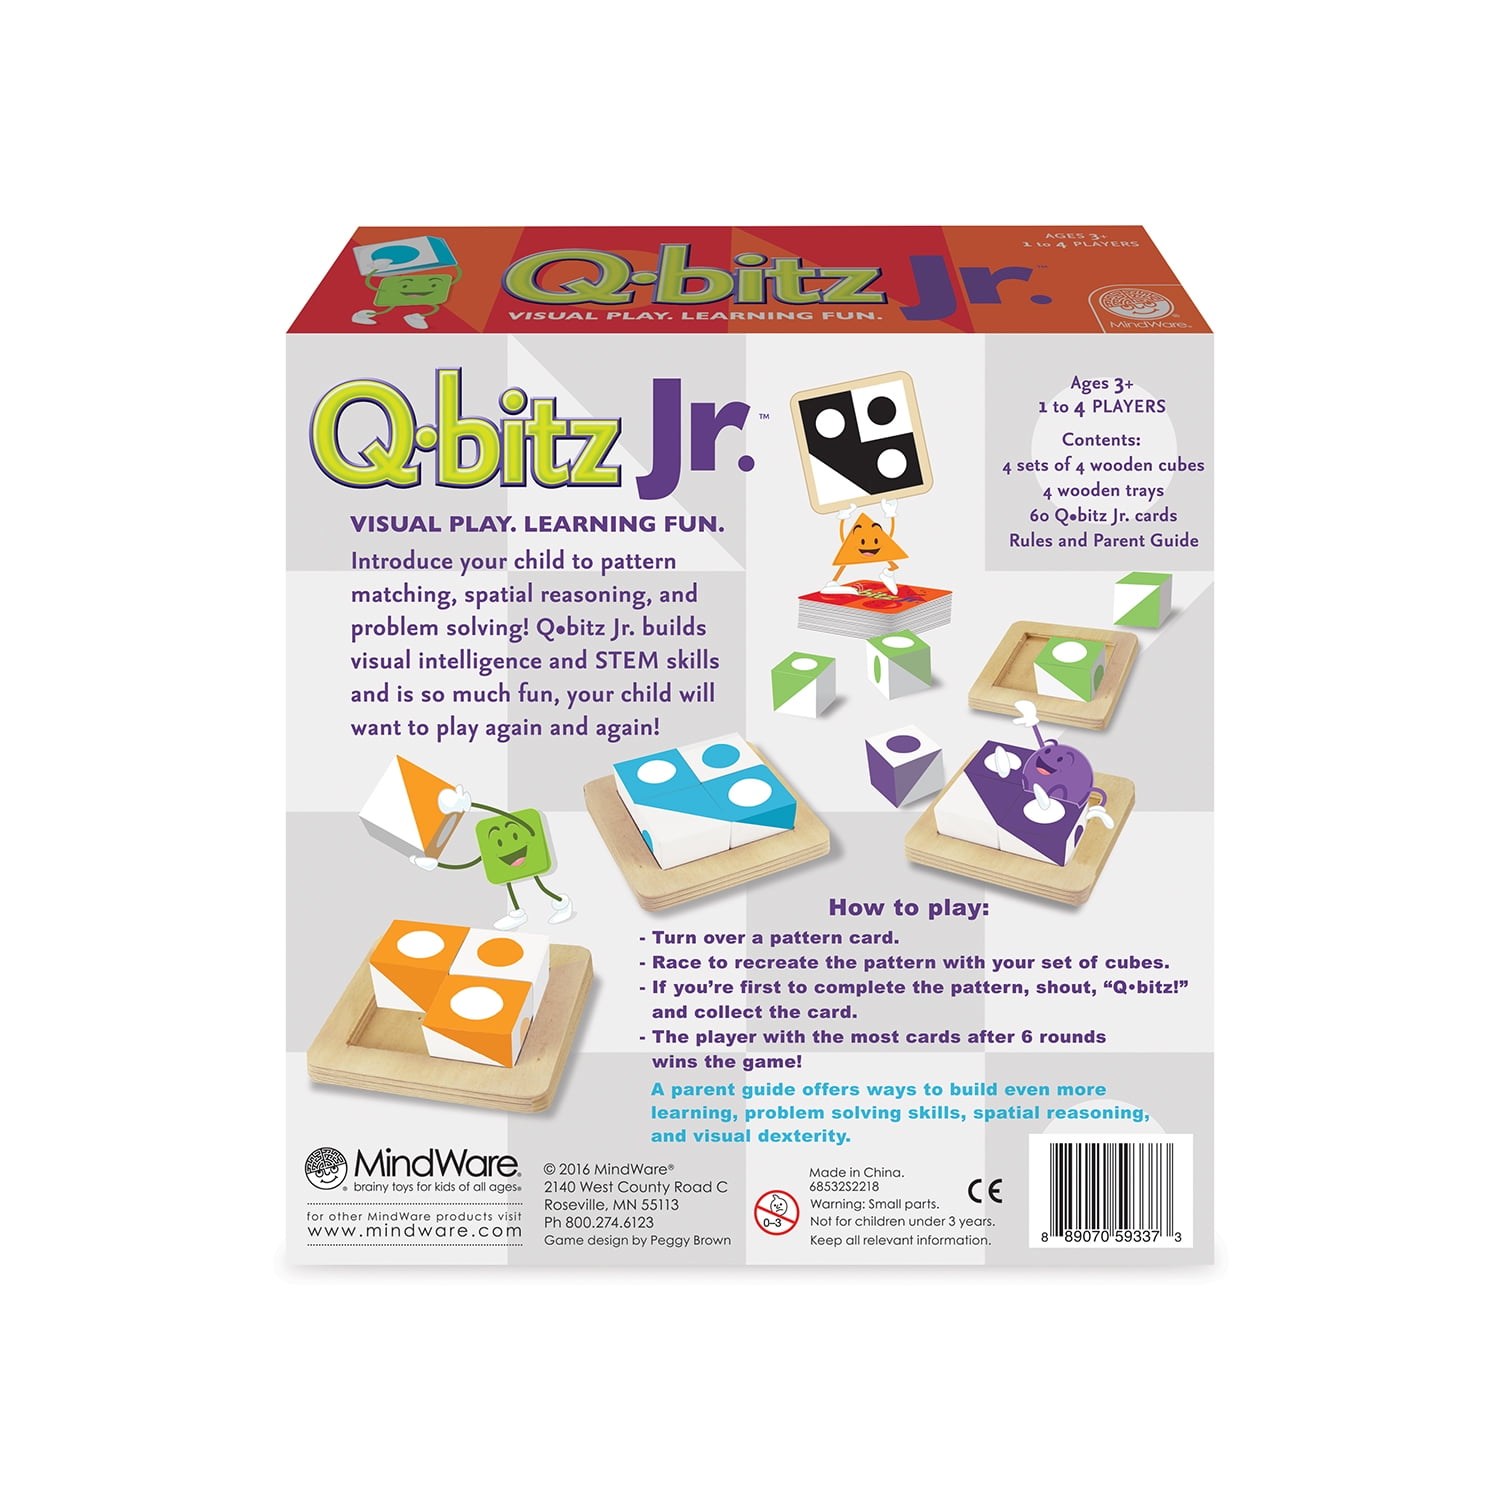 MindWare Q-bitz Jr. Game - 60 Pattern Cards, 4 Wooden Cube & Tray Sets -  Visual Play & Learning Fun for Kids - 1 to 4 Players - Ages 3+ 